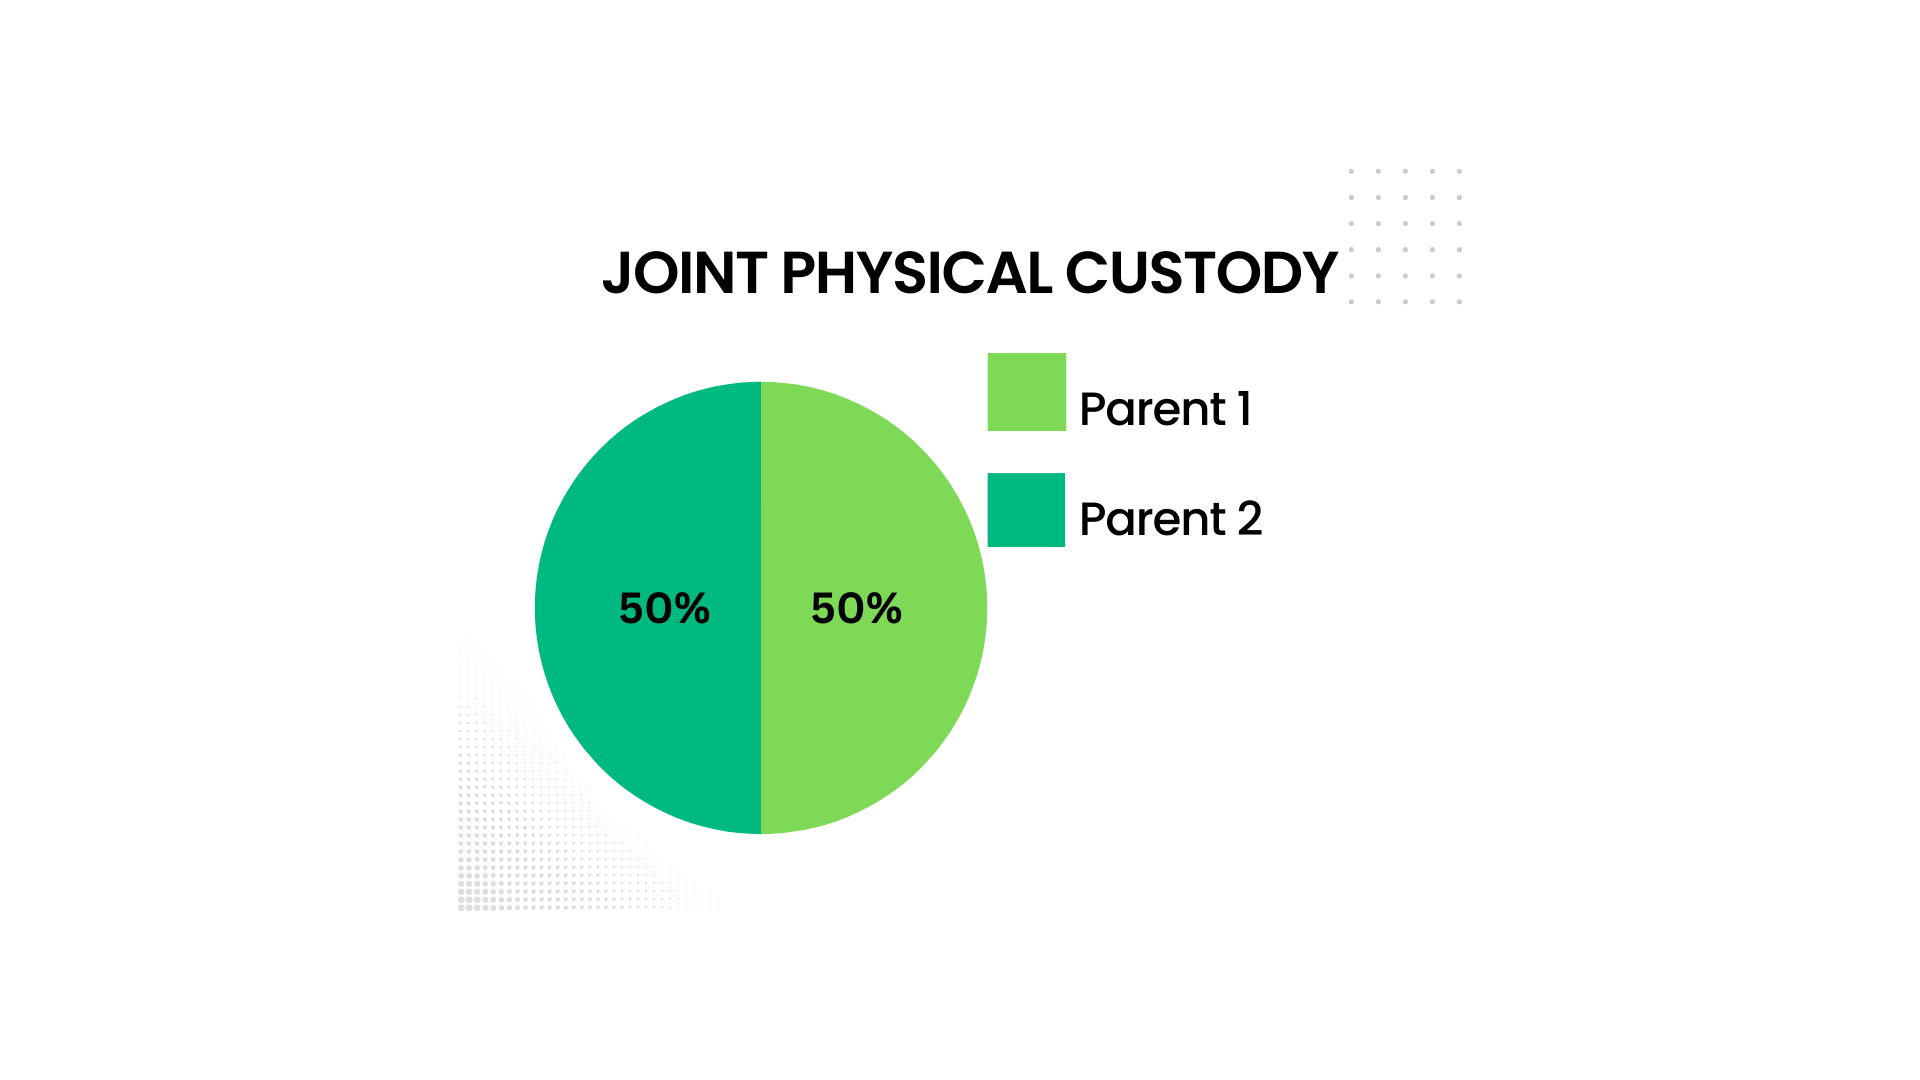 Joint physical custody, also known as shared parenting, refers to a child custody arrangement in which both parents have equal rights and responsibilities for the care and upbringing of their child. This type of custody